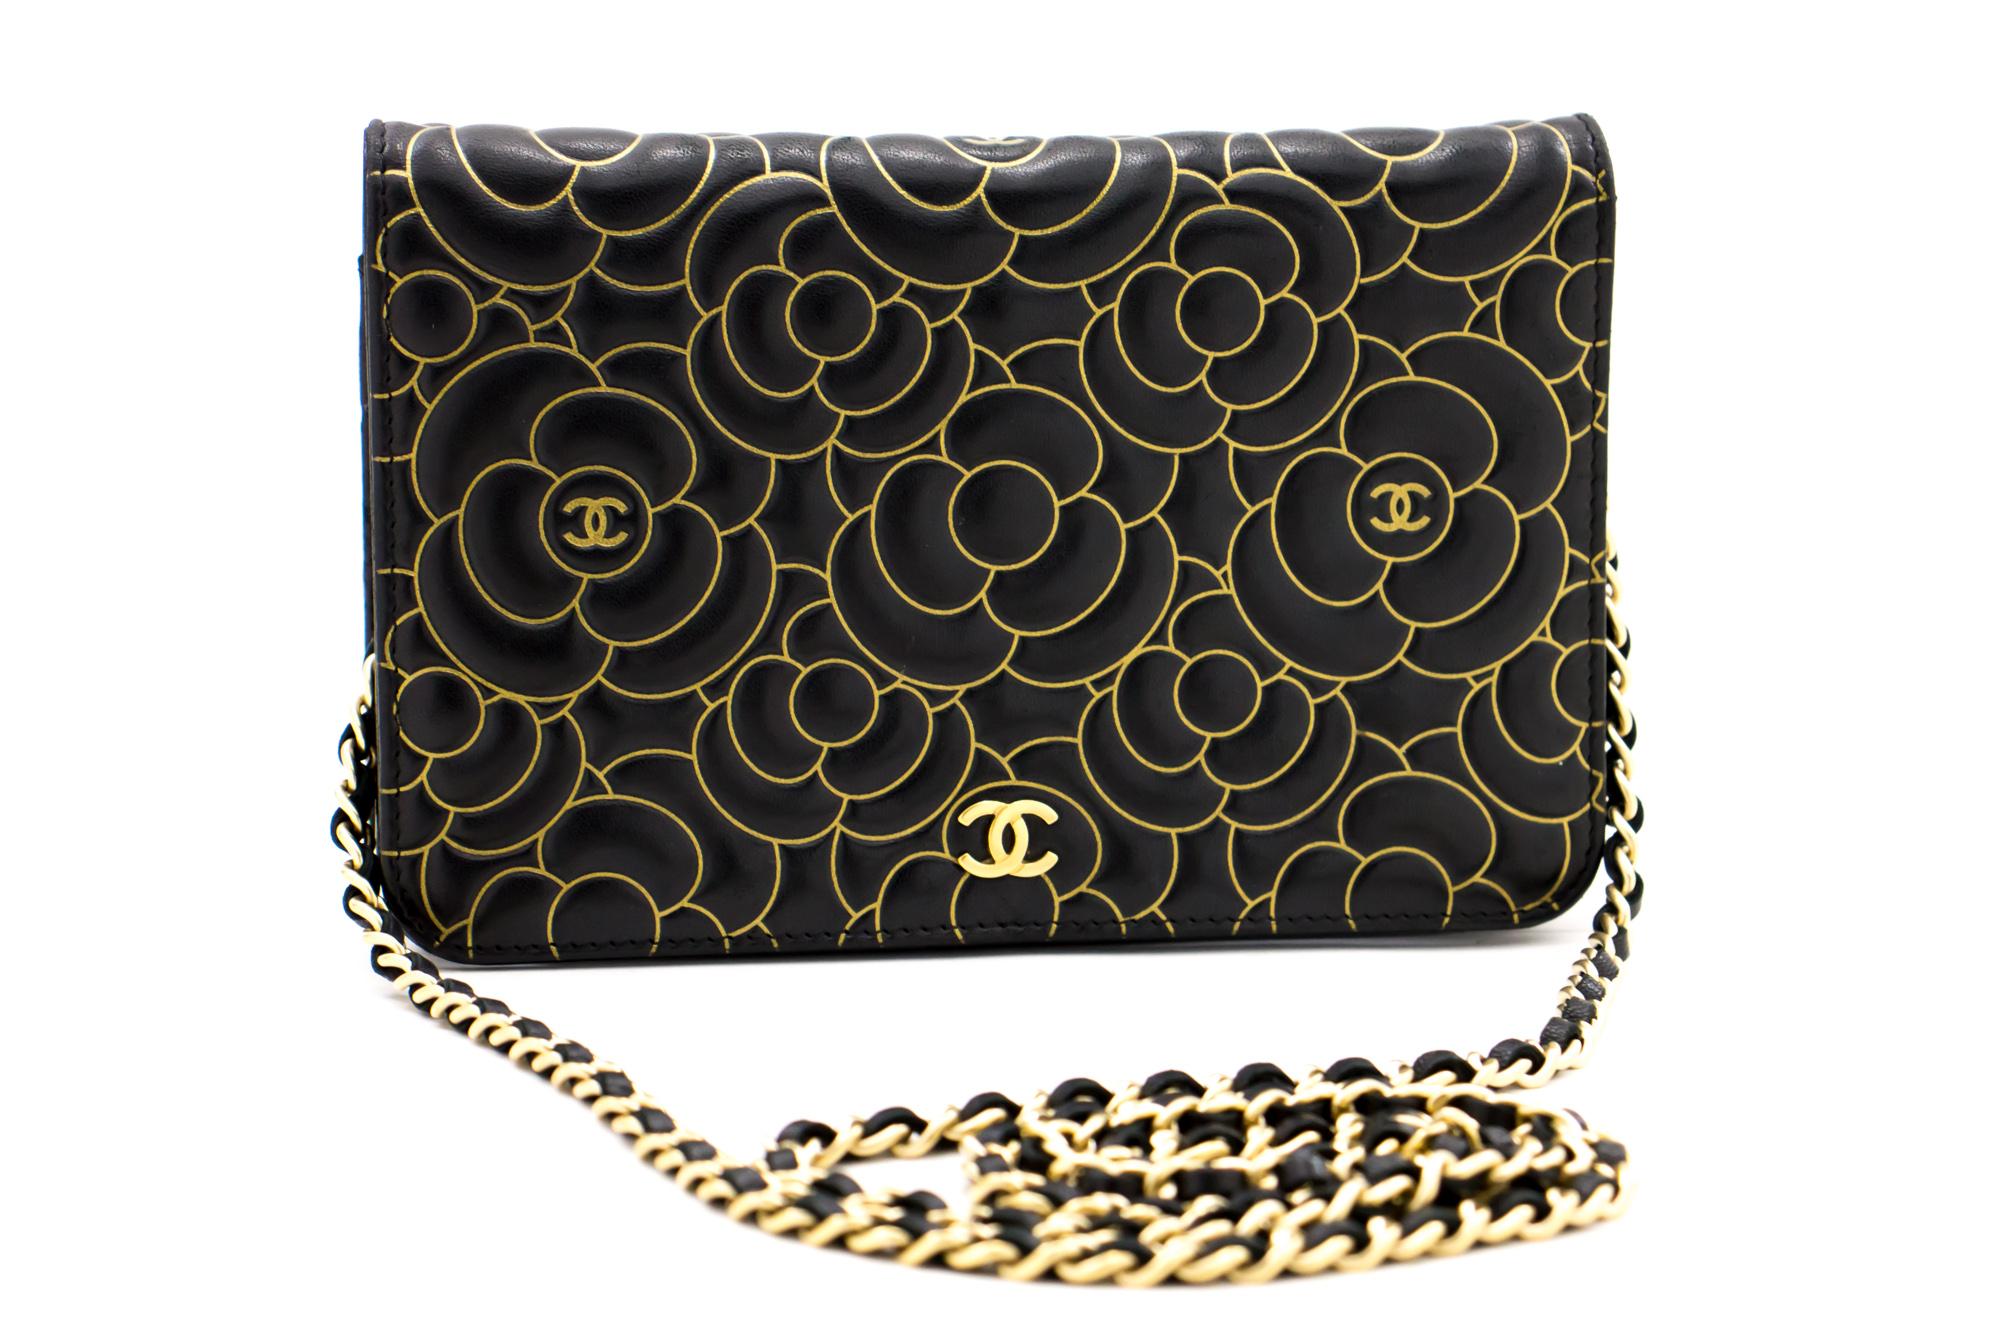 An authentic CHANEL Black Camellia Embossed Wallet On Chain WOC Shoulder Bag. The color is Black. The outside material is Leather. The pattern is Embossed. This item is Contemporary. The year of manufacture would be 2015.
Conditions &